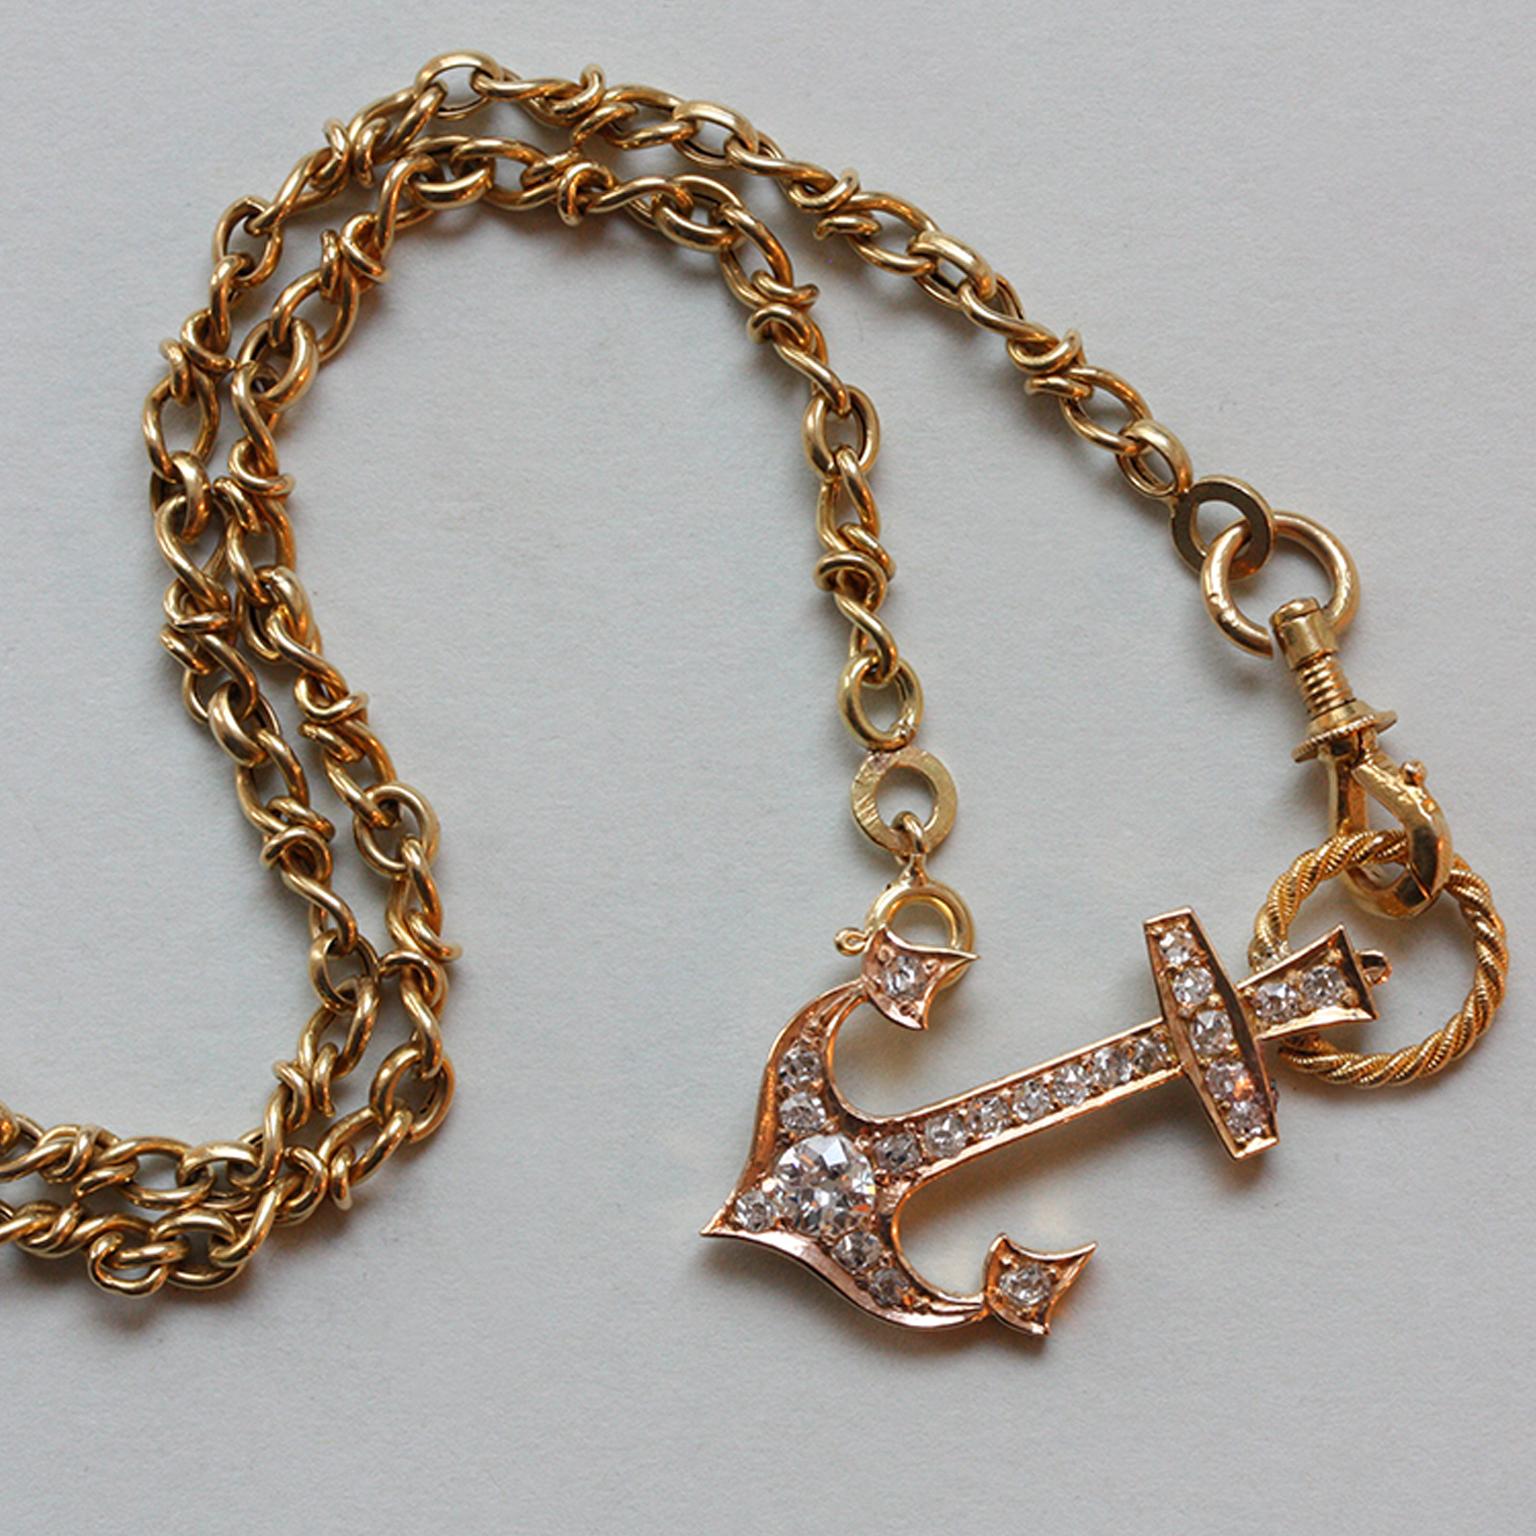 An 18 carat gold anchor pendant set with old cut diamonds (app. 0.55 carats in total), with a large hoop of twisted gold wire and a small hoop to wear the anchor either straight or rigged, with an 18 carat gold chain with knot links and a mechanical